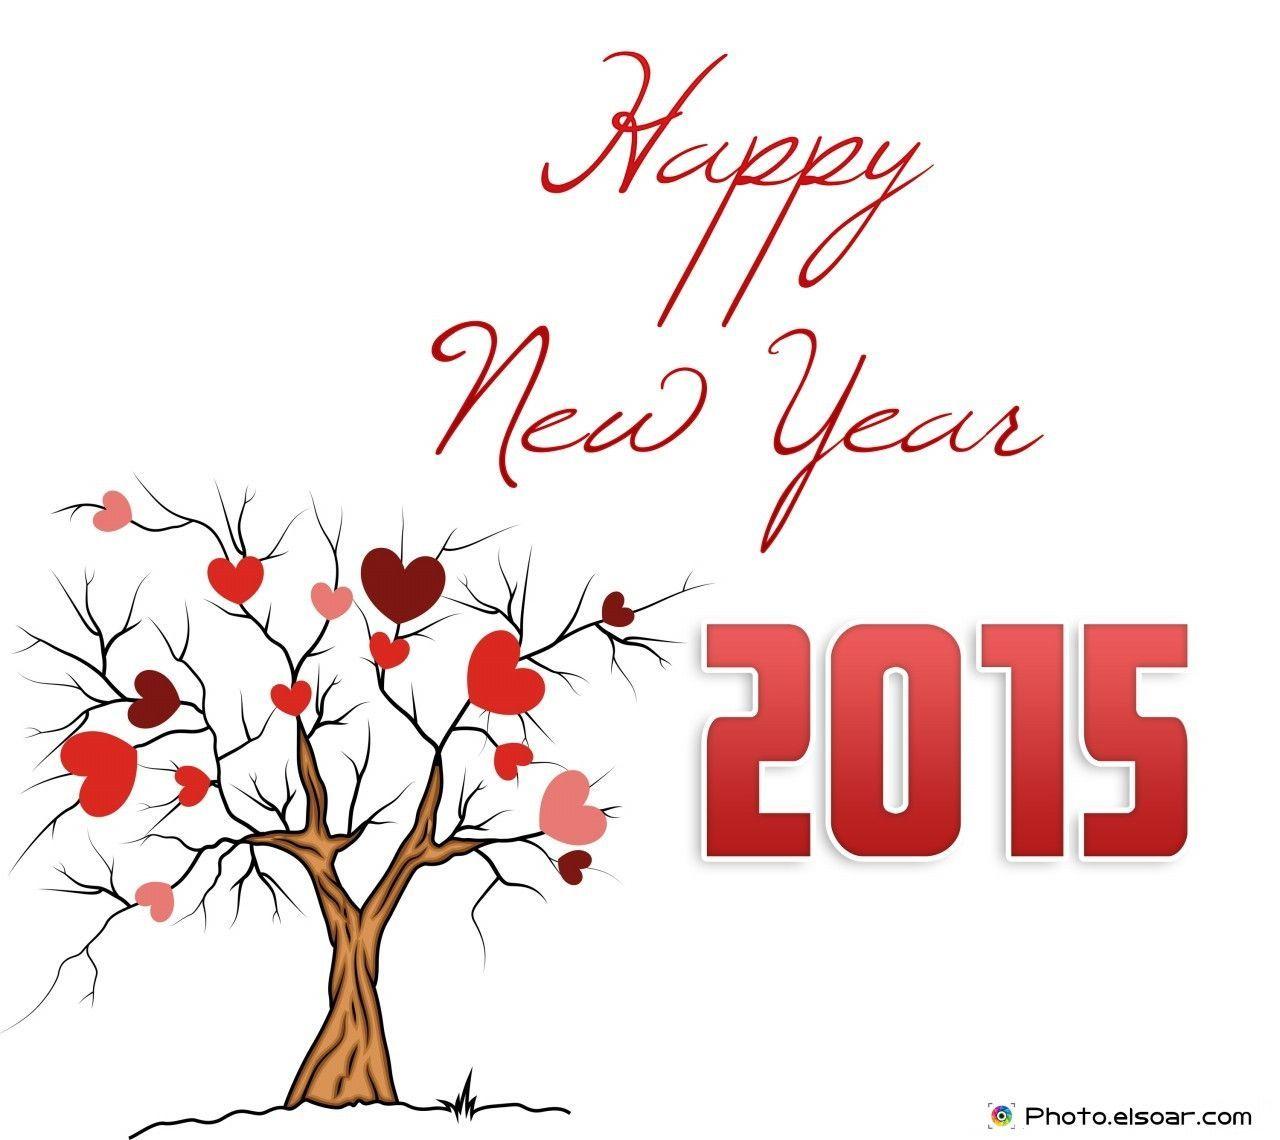 Happy New Year 2015 With Tree And Hearts Wallp Wallpaper